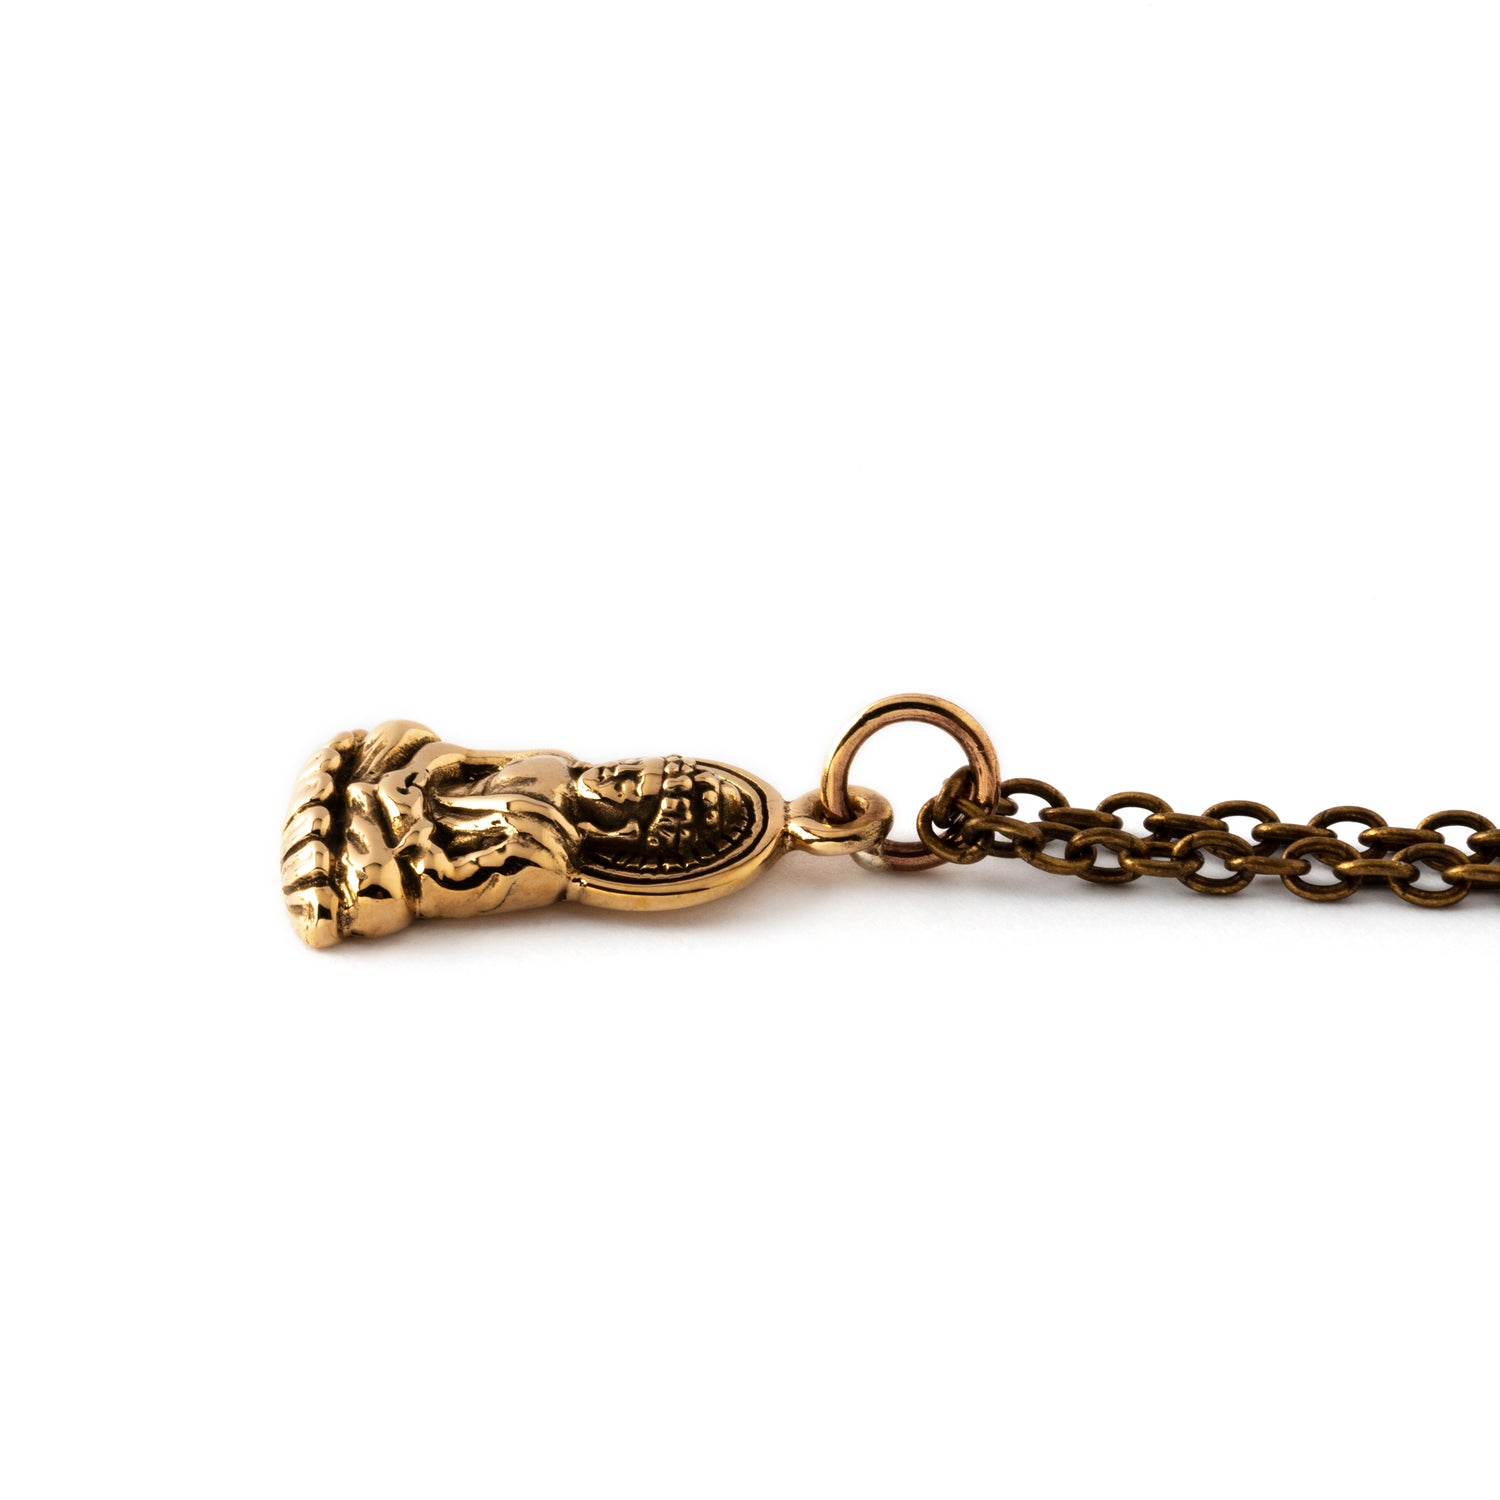 tiny bronze Buddha pendant on a bronze chain necklace down view